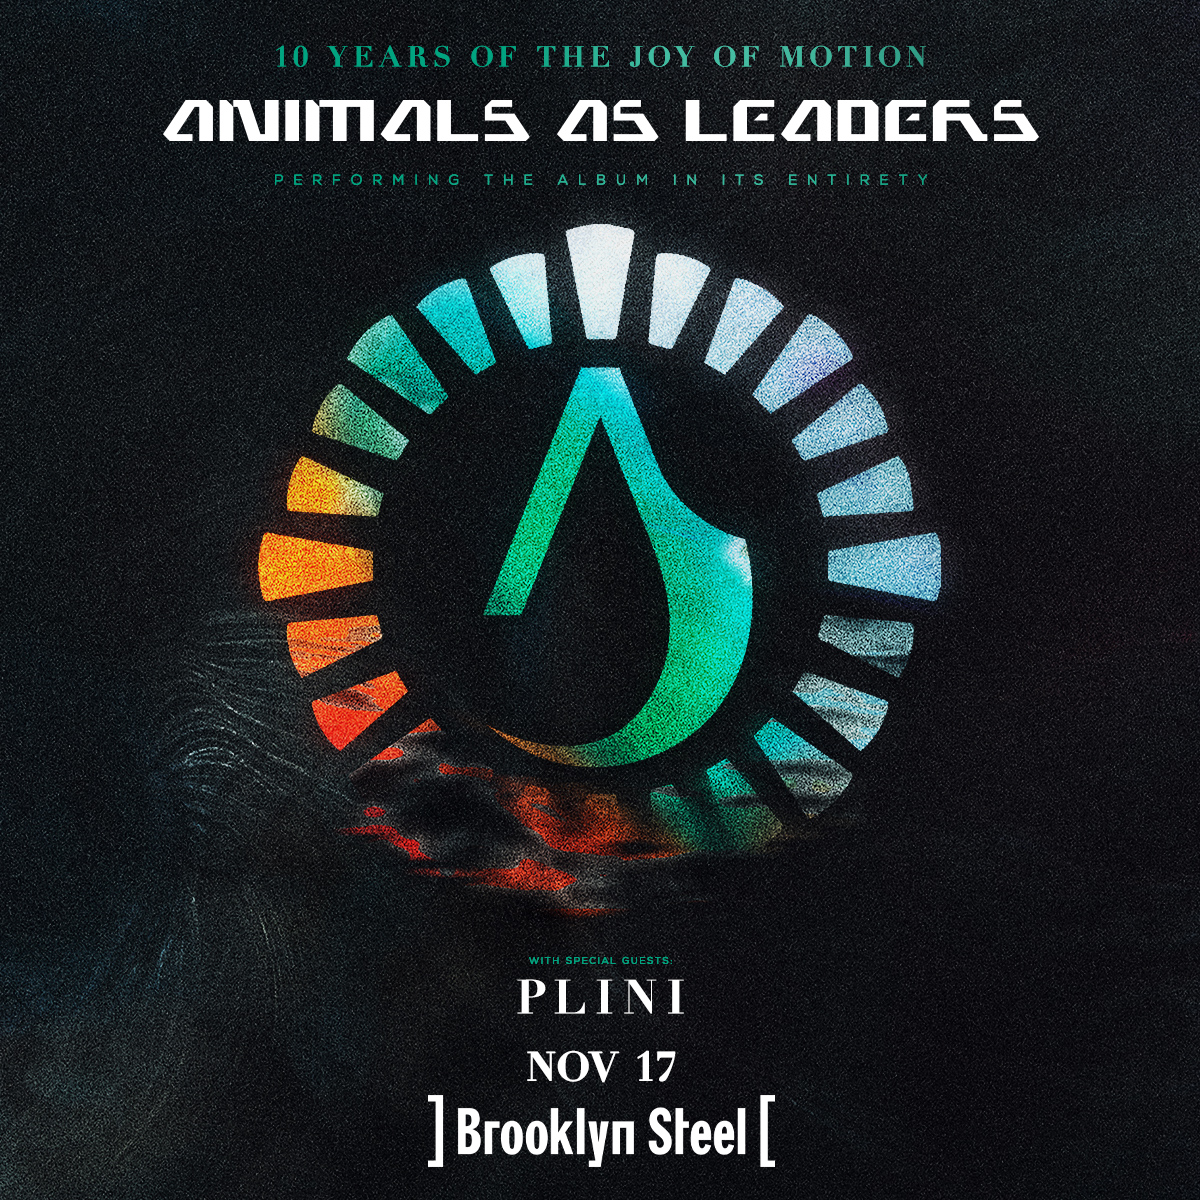 JUST ANNOUNCED: don't miss Animals as Leaders in Brooklyn on November 17 🔥 tickets on sale this Friday at 10am!